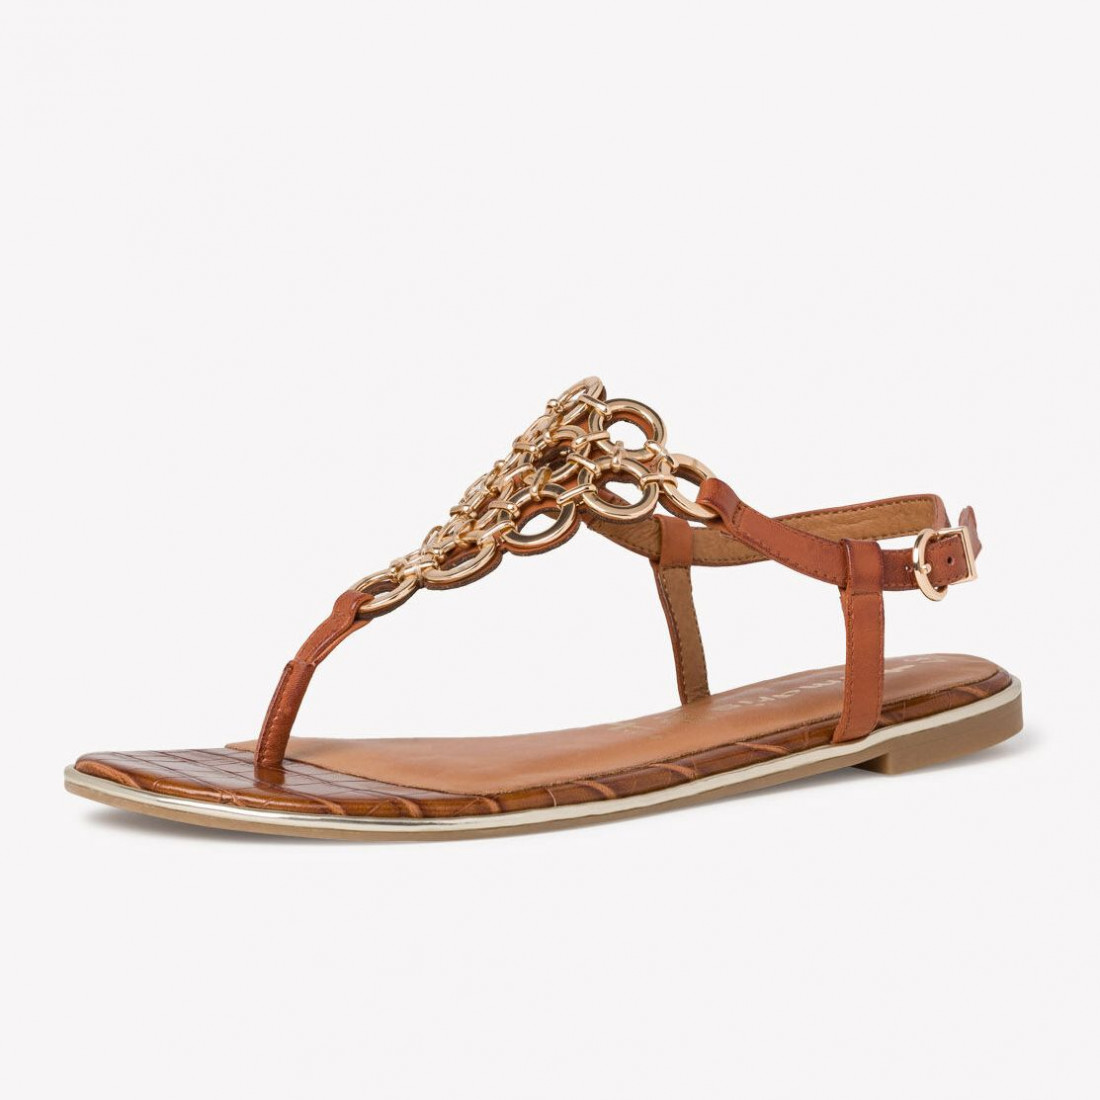 Tamaris leather thong sandal with golden rings